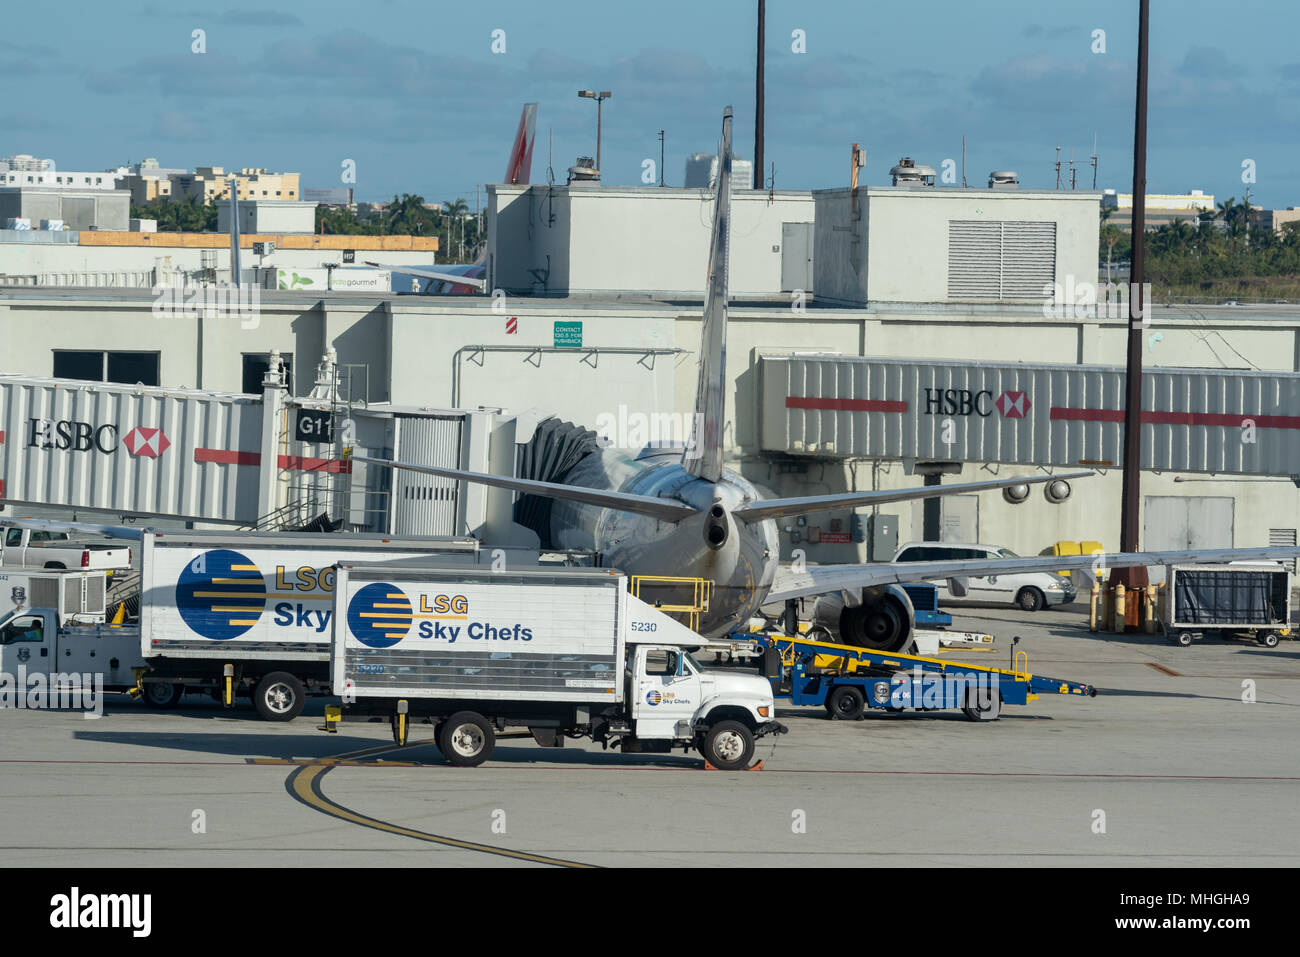 Catering trucks at a jet at a gate of Miami International Airport in Miami, Florida. Stock Photo